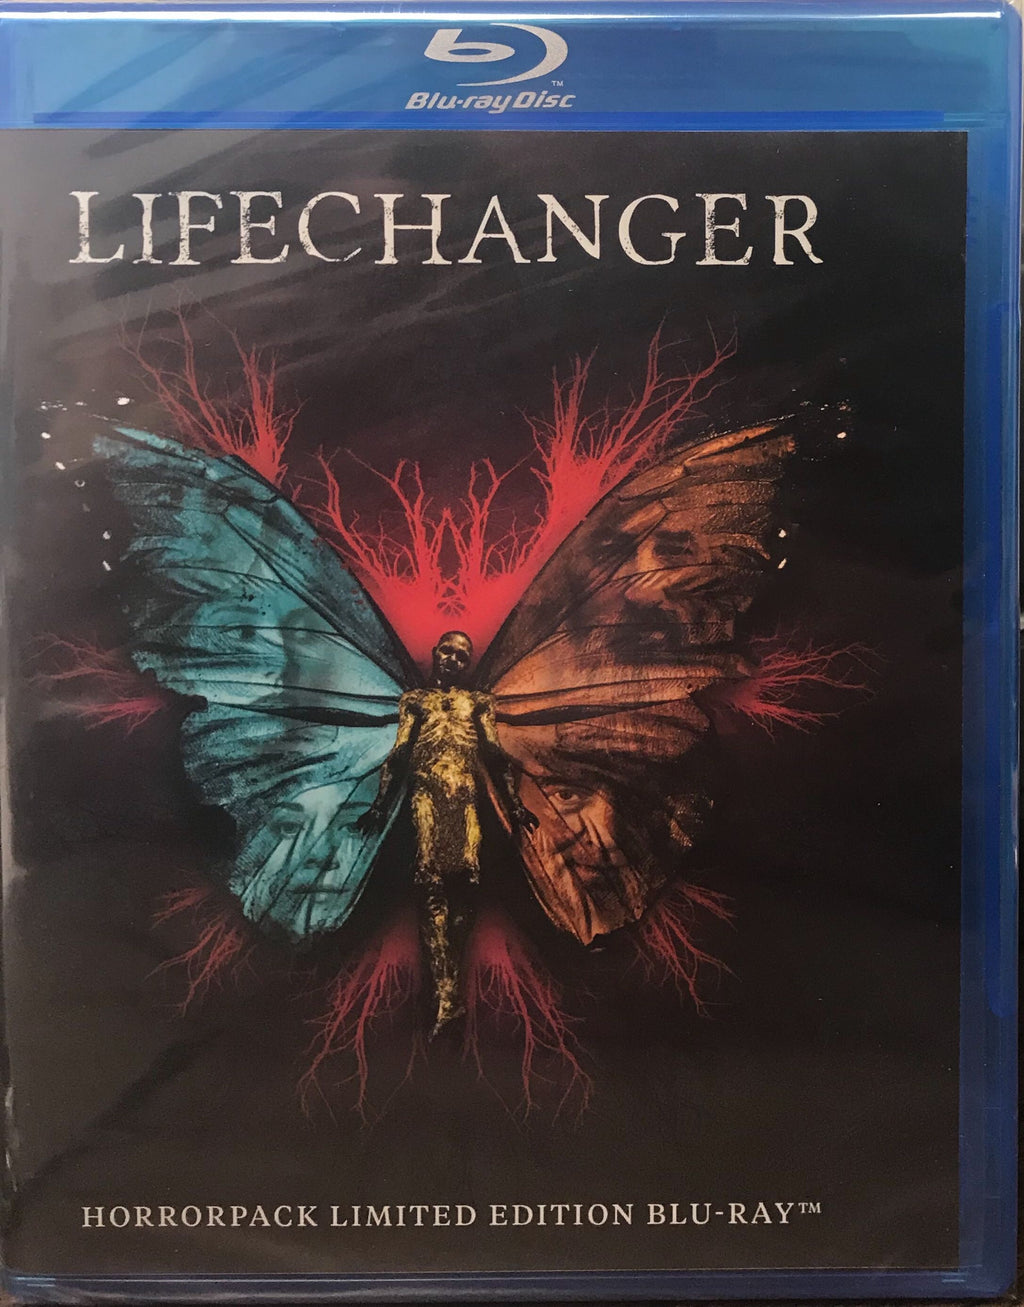 Lifechanger - HorrorPack Limited Edition Blu-ray #36